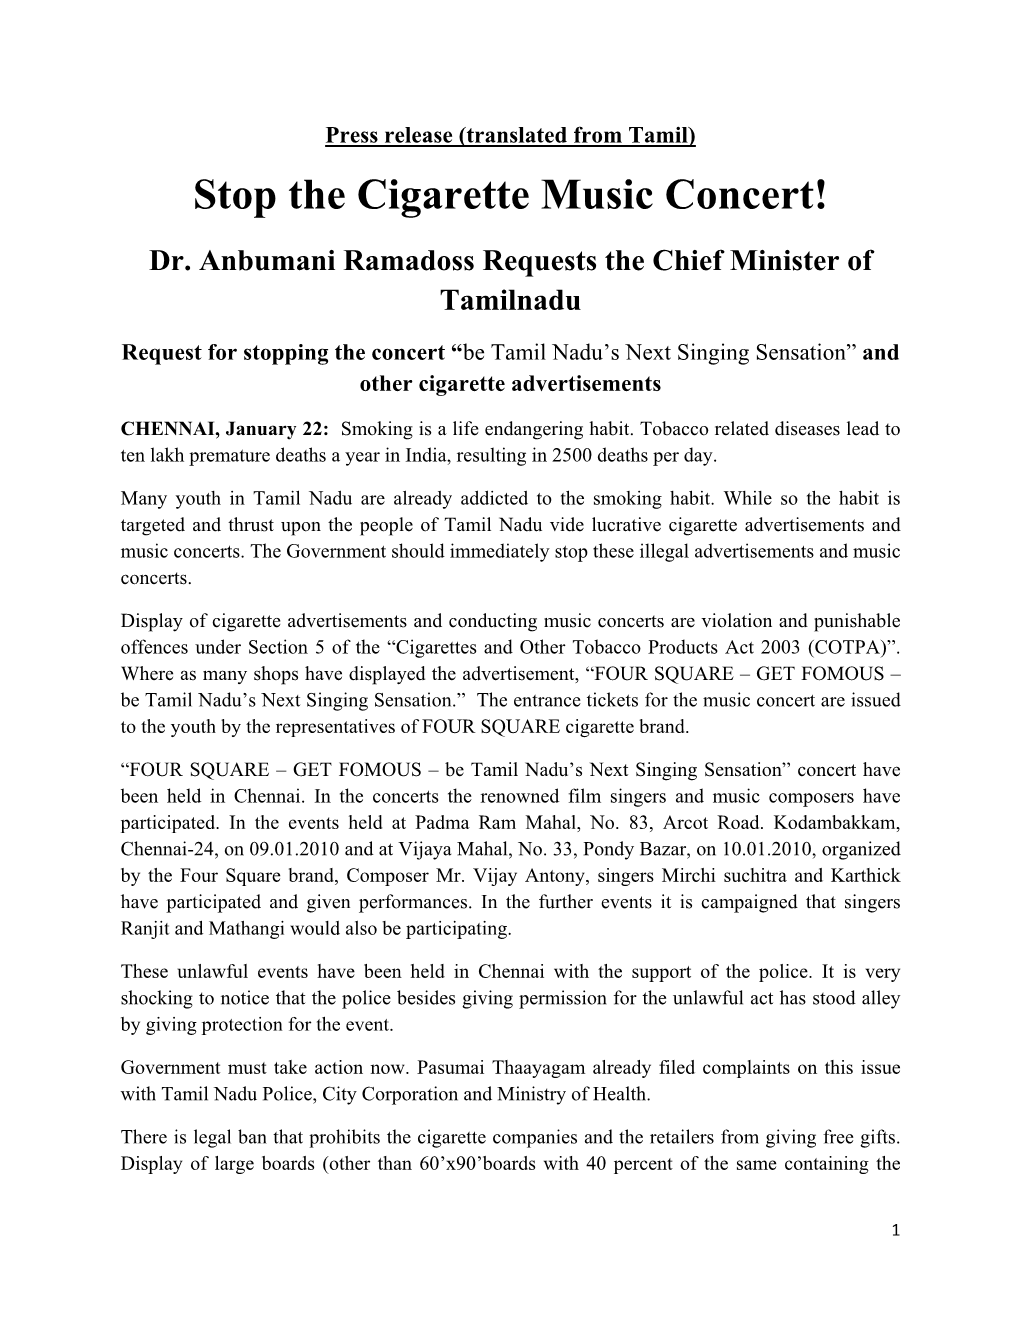 Press Release (Translated from Tamil) Stop the Cigarette Music Concert! Dr